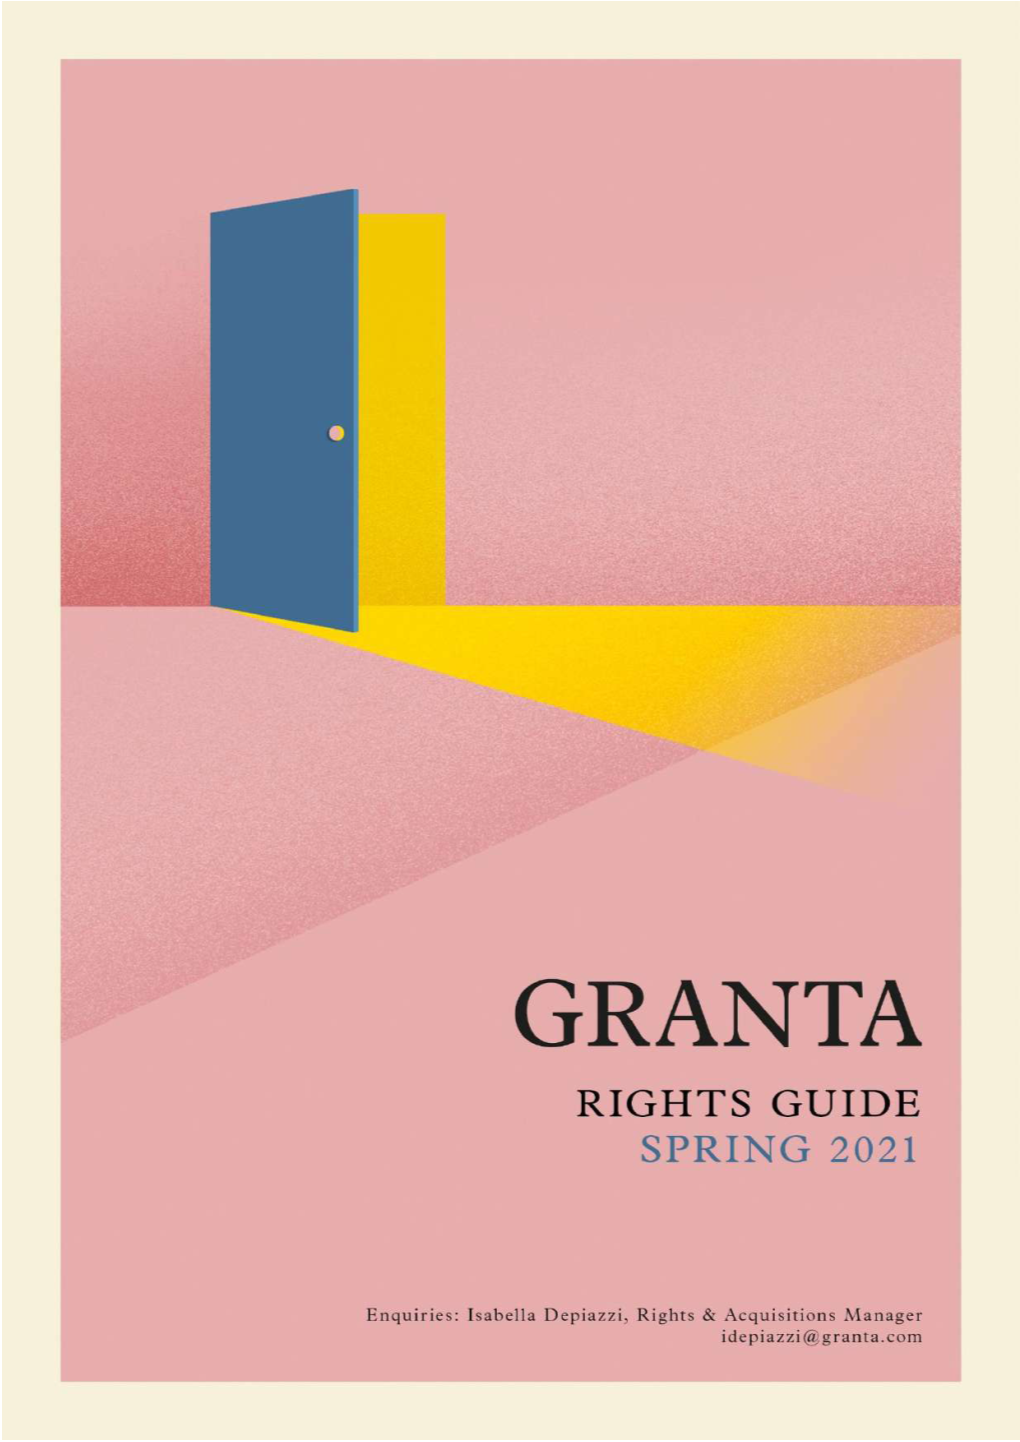 Download Our Latest Rights Guide